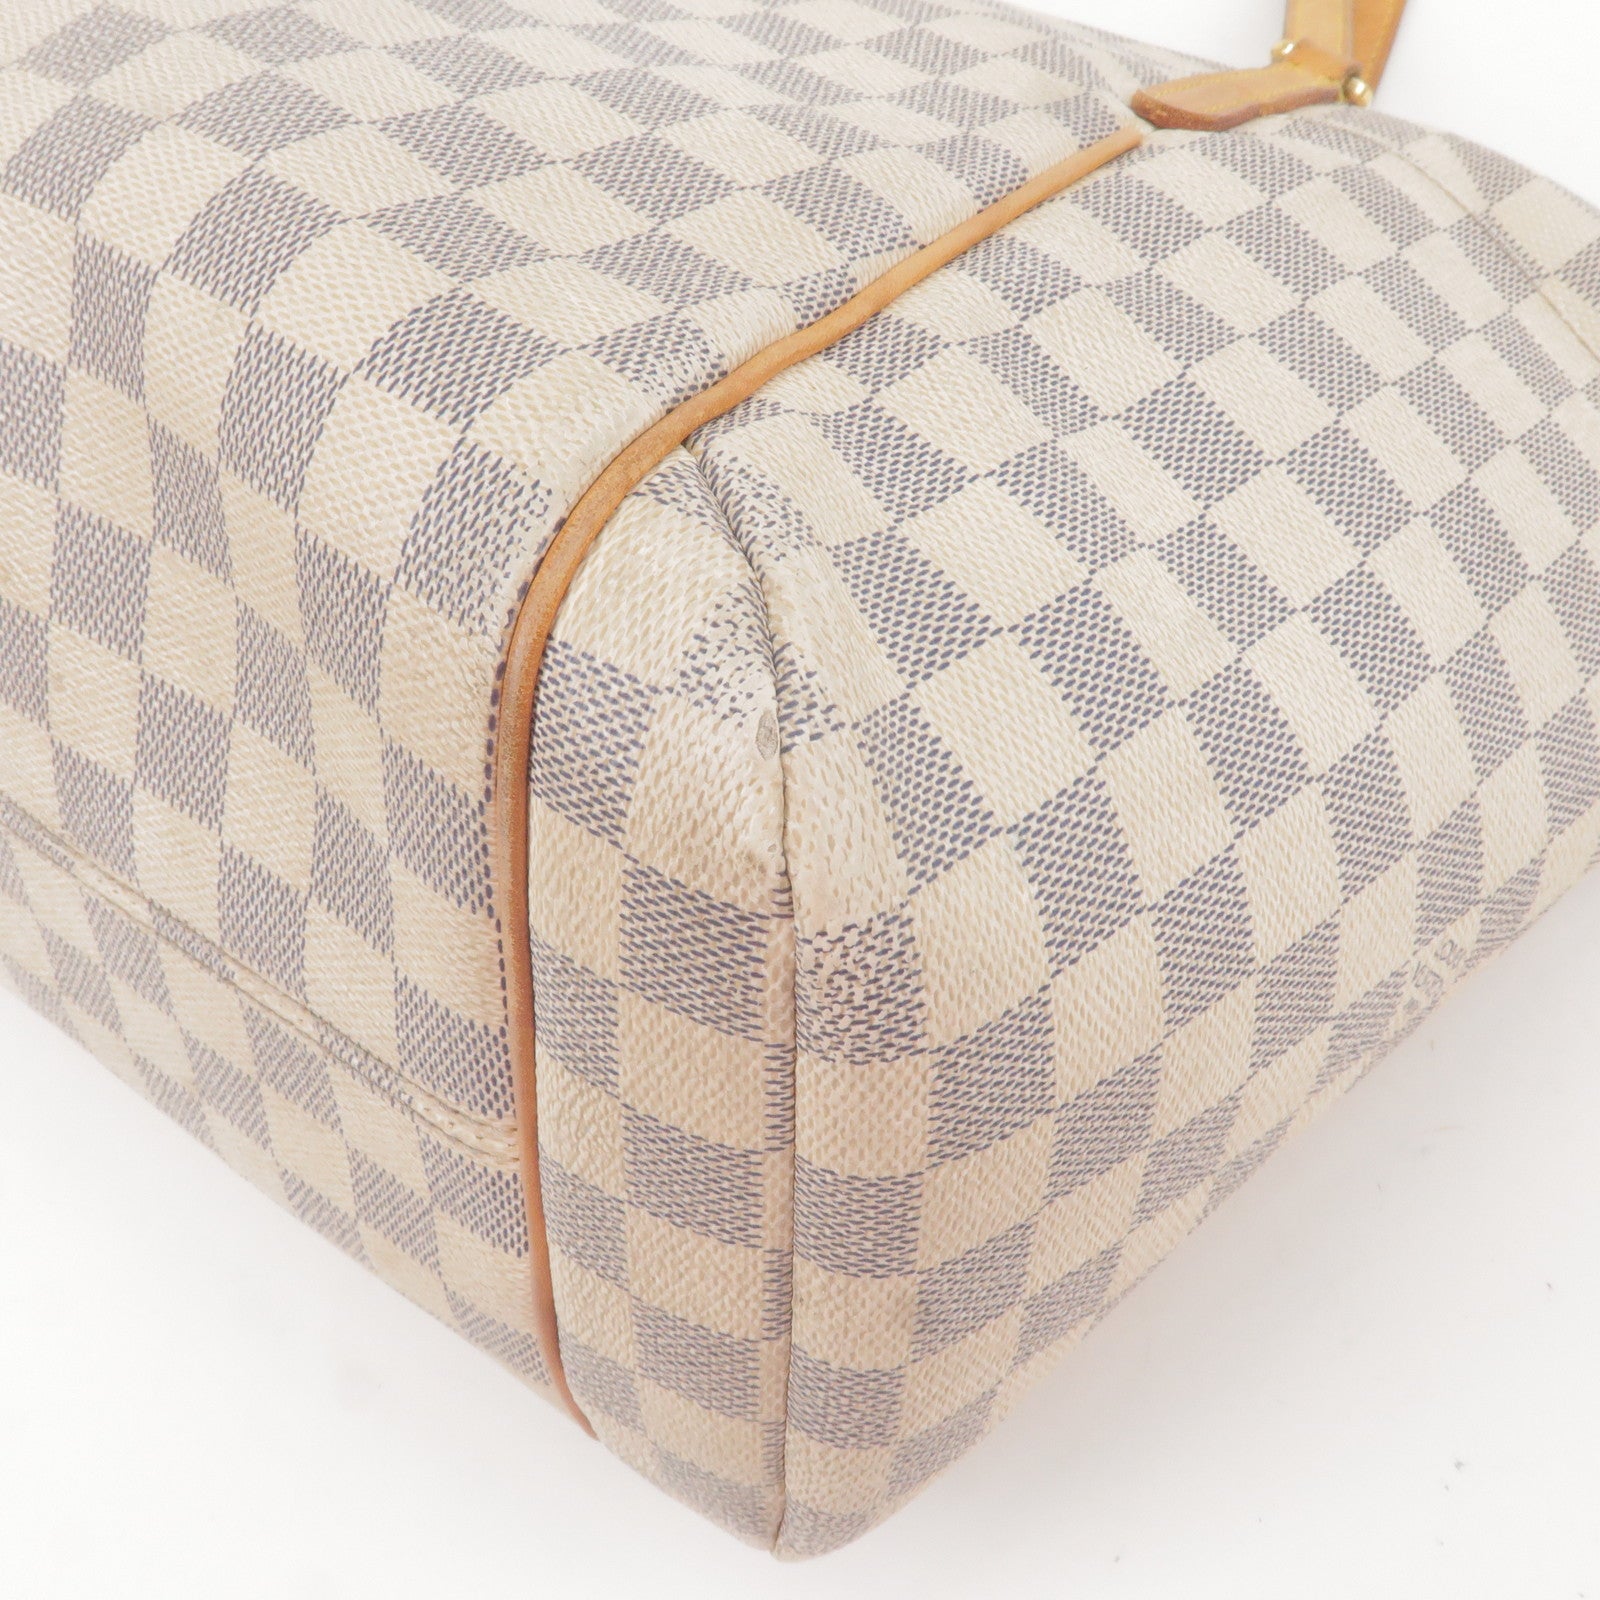 Louis Vuitton pochette accessoires in beige monogram patent leather and  natural leather - Bag - Damier - Tote - ep_vintage luxury Store - Louis -  N51262 – dct - MM - Vuitton - Totally - Azur